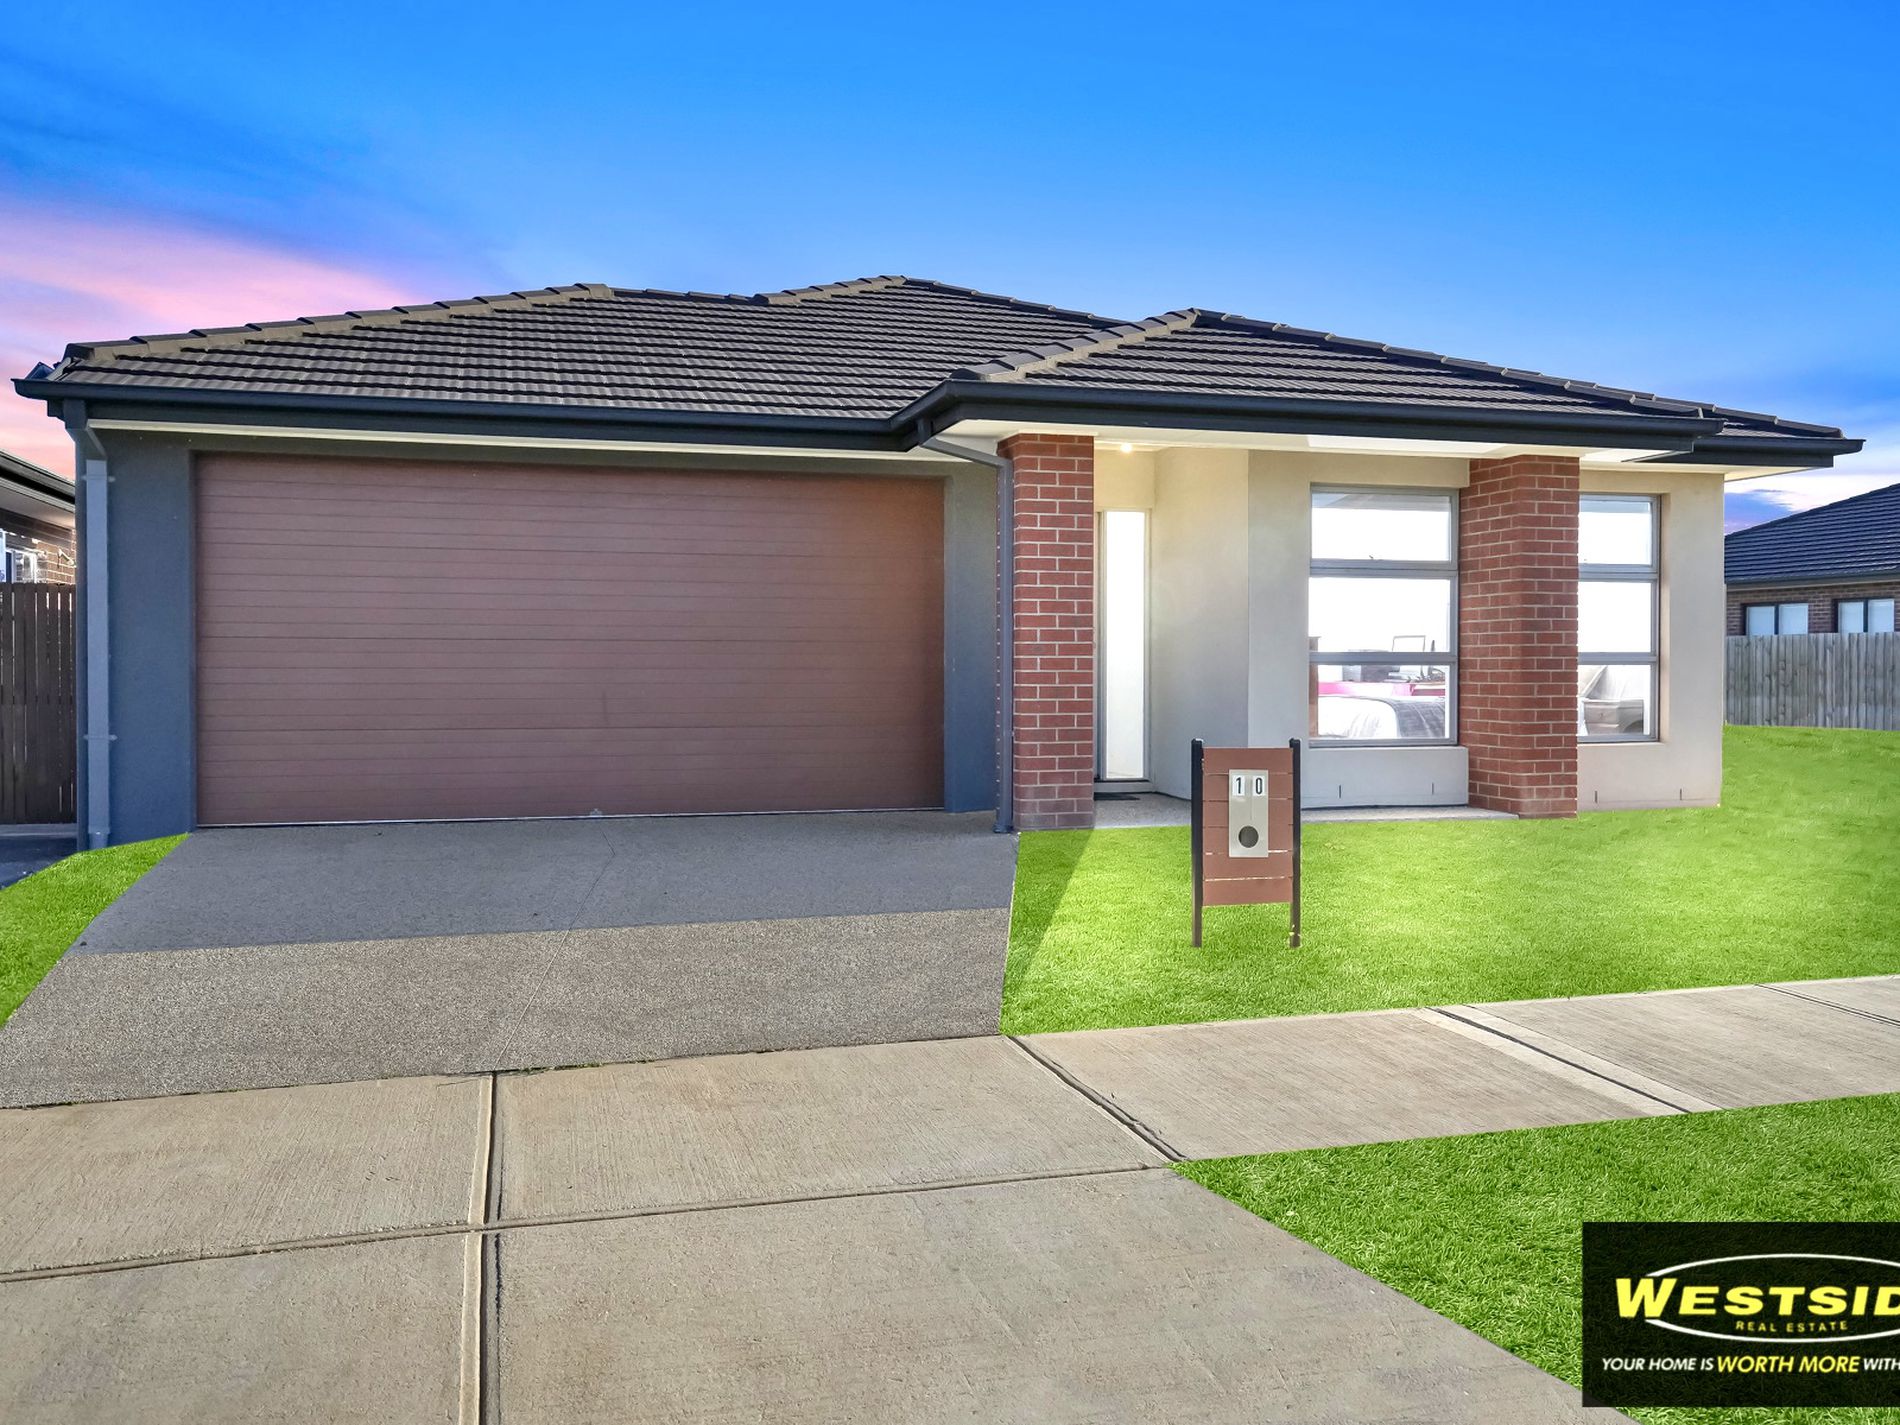 10 Wallaby Road, Aintree